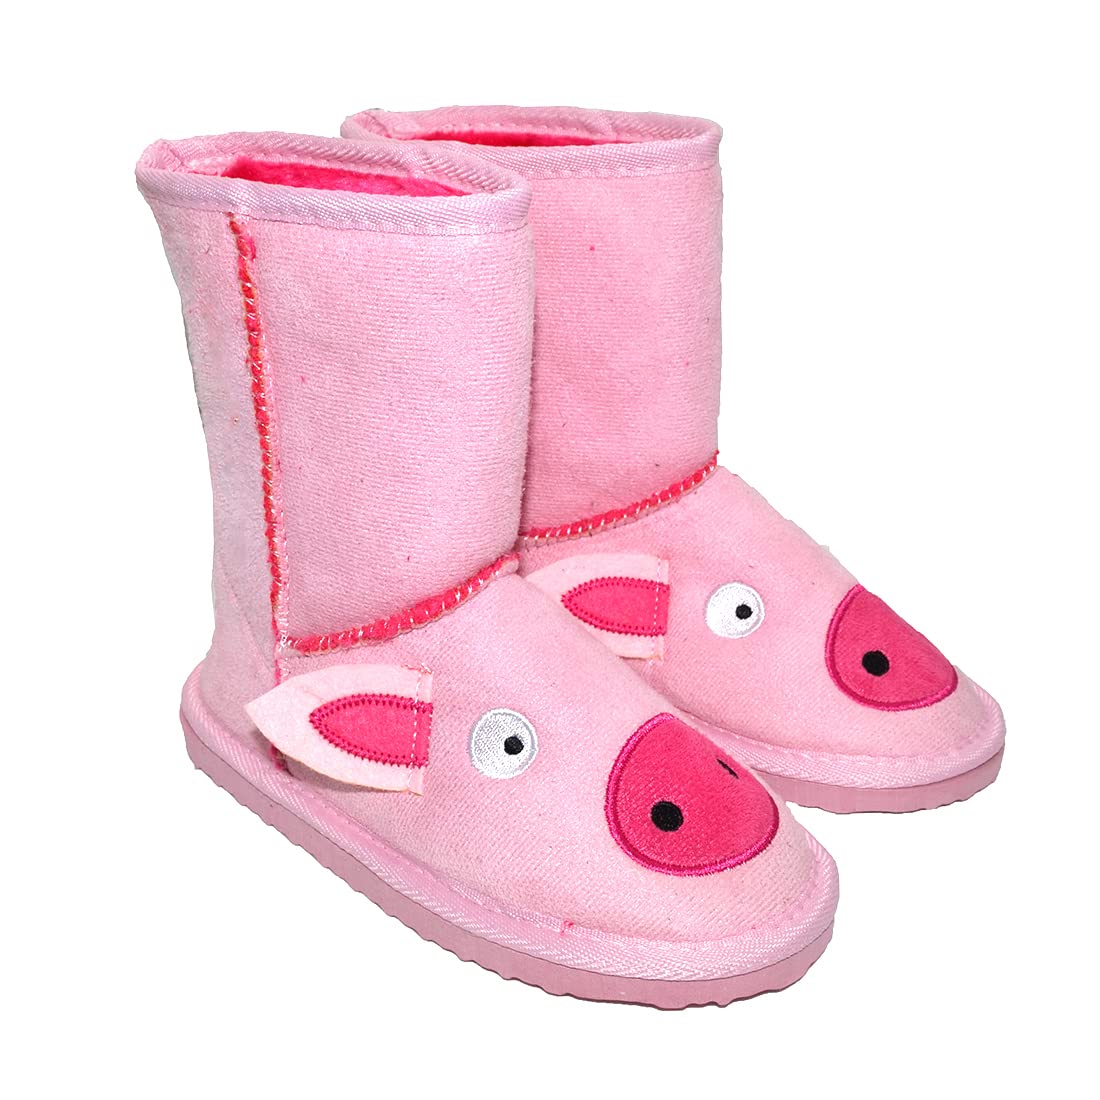 Millffy Animal Character boot Slippers for Kids Boys and Girls Slipper Boots Winter Warm Shoes